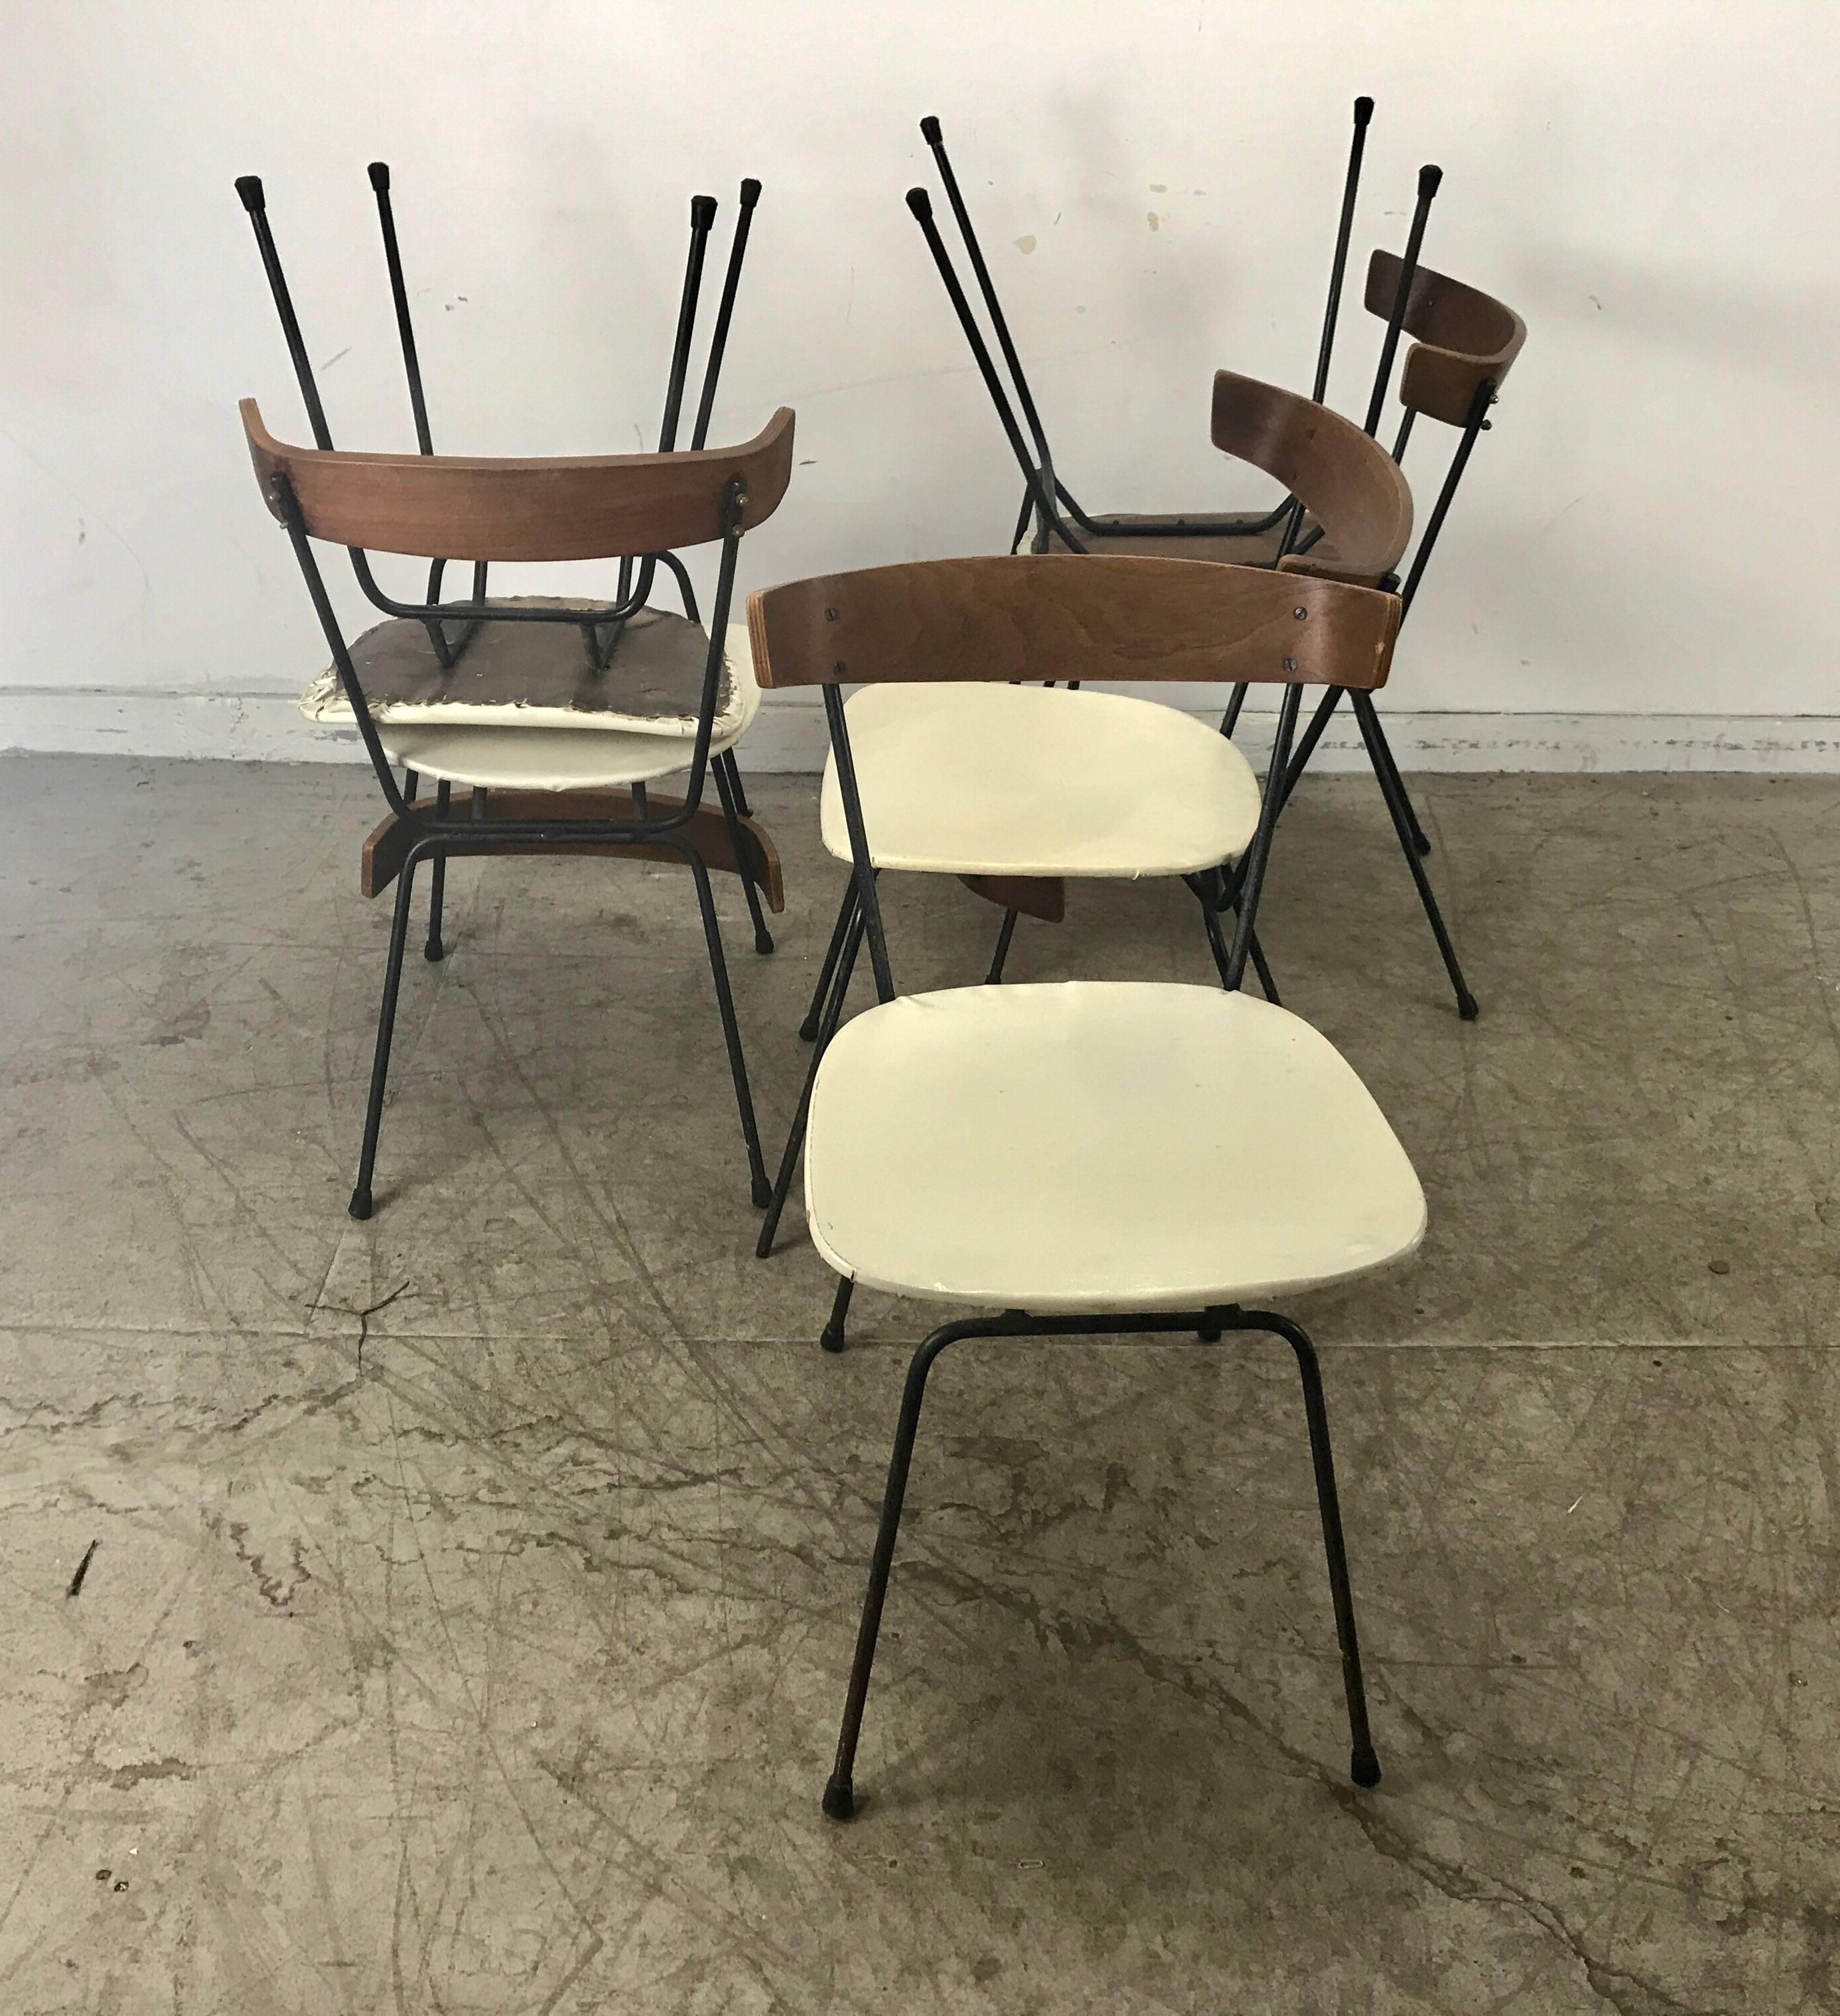 American Classic Modernist Dining Chairs. Iron and Plywood by Clifford Pascoe